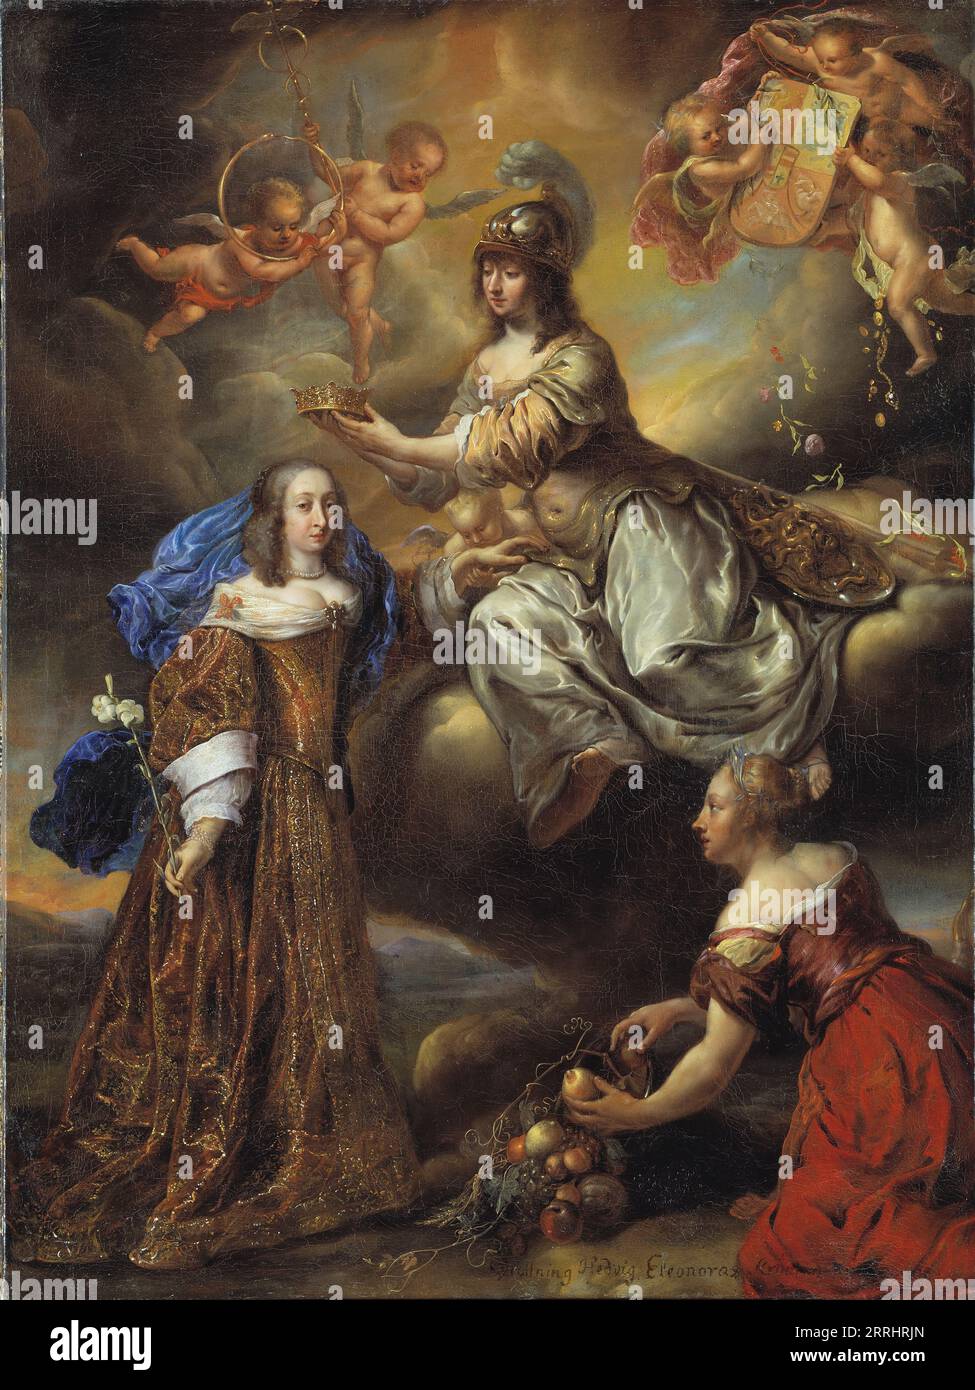 Allegory of Hedvig Eleonora, 1636-1715, crowned by Minerva, 1654. Stock Photo